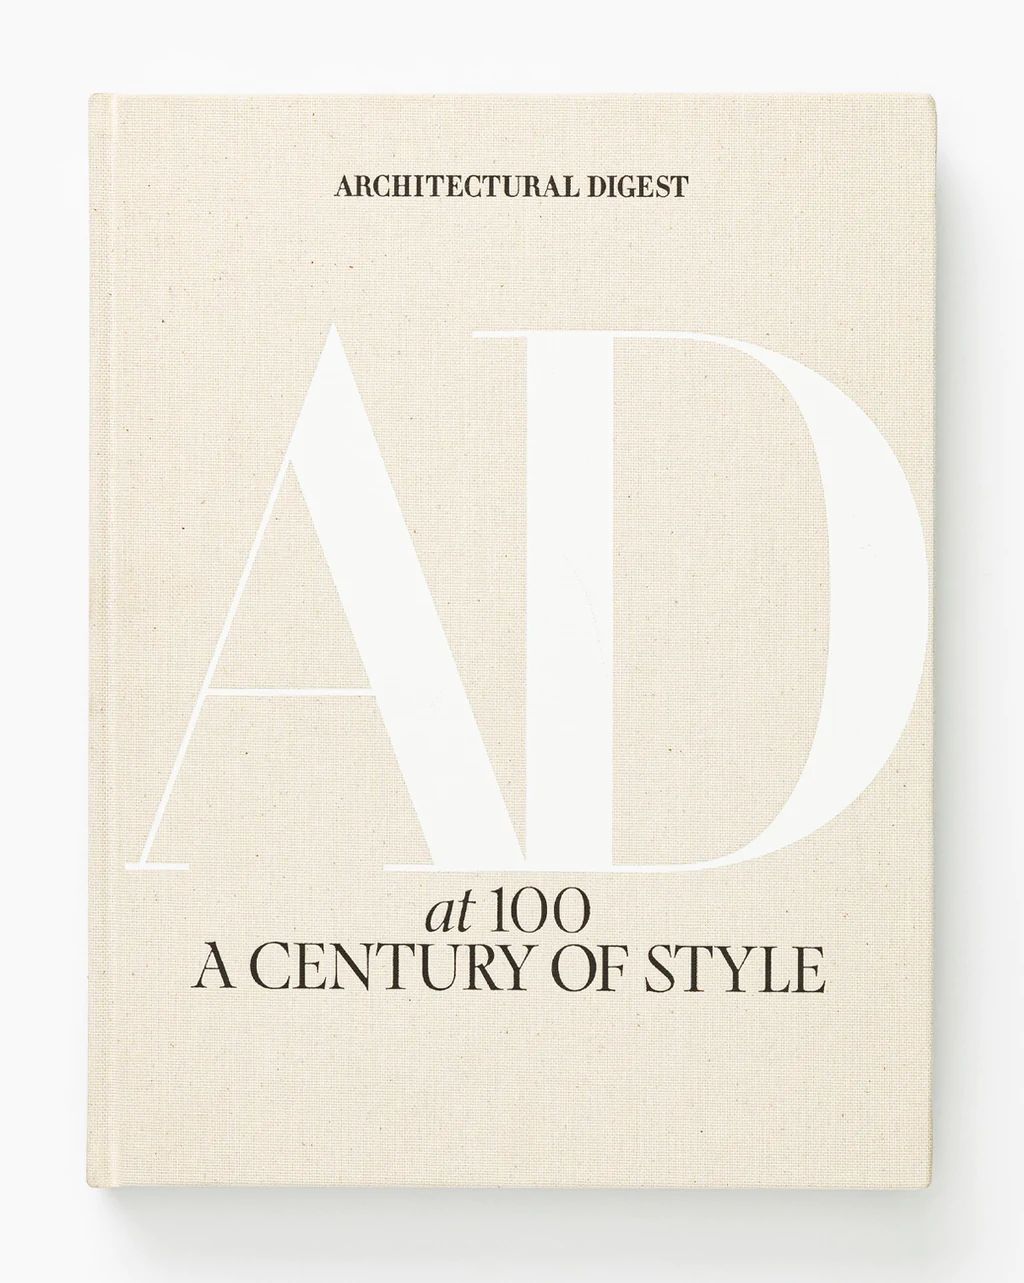 Architectural Digest at 100 | McGee & Co.